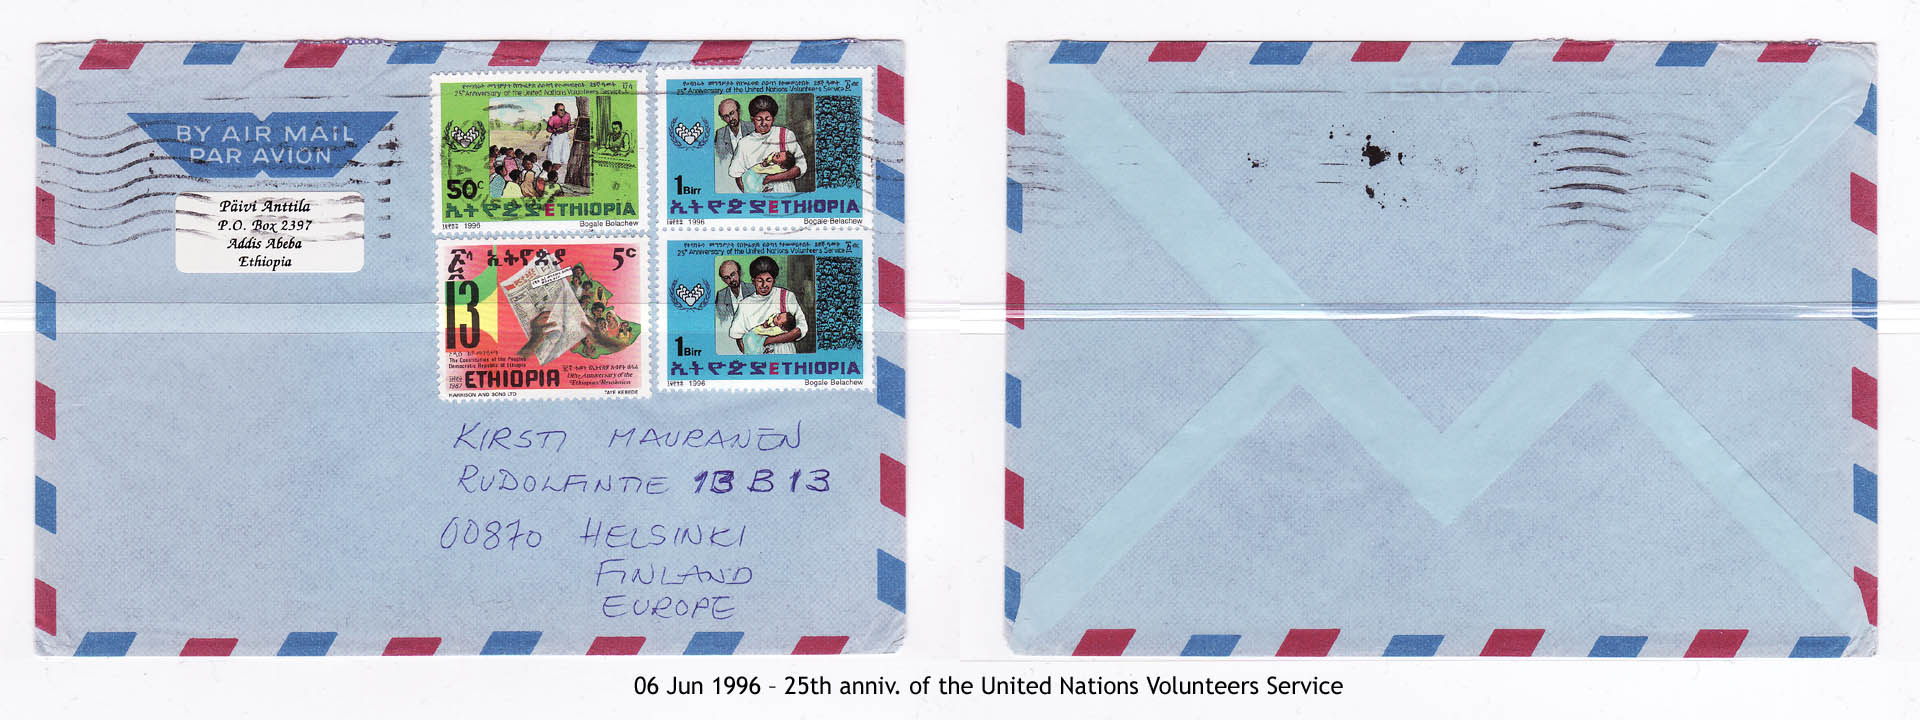 19960606 – 25th anniv. of the United Nations Volunteers Service